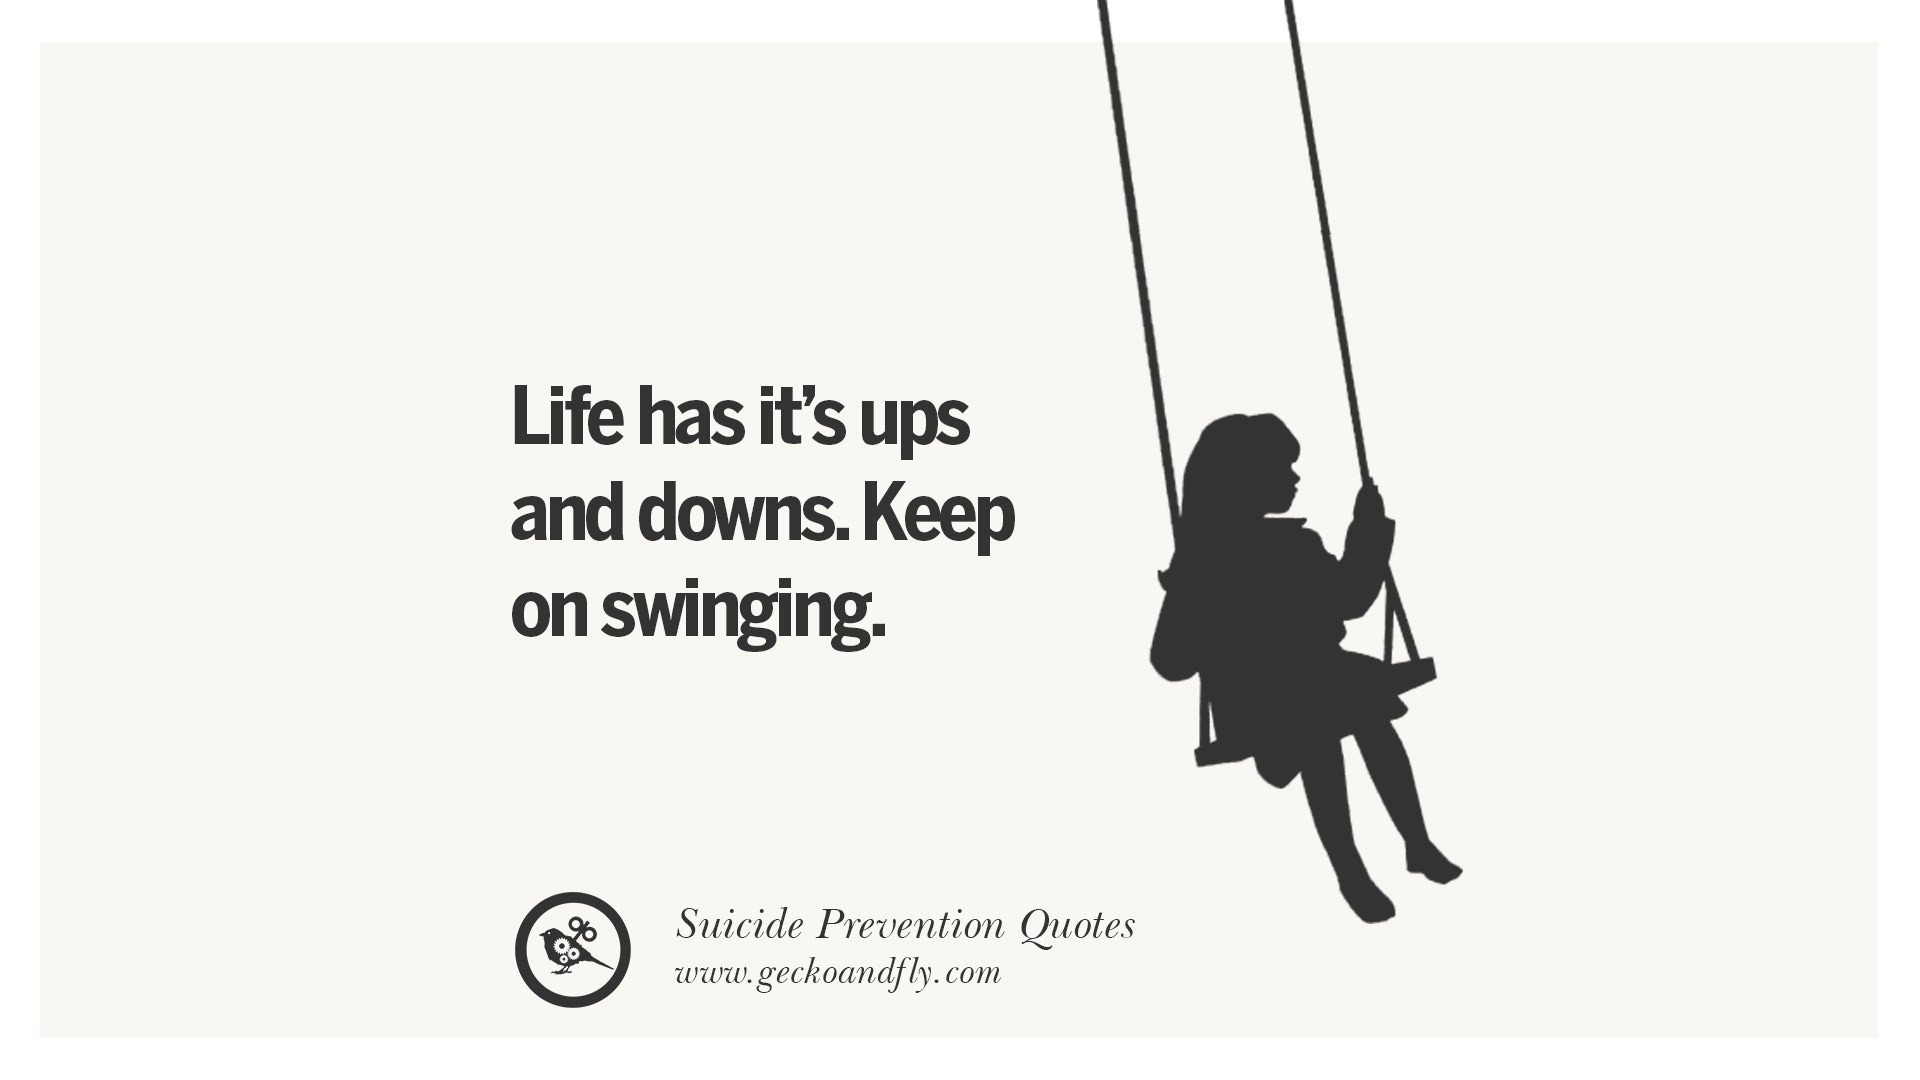 Life Ups And Down Quotes
 30 Helpful Suicidal Prevention Ideation Thoughts And Quotes